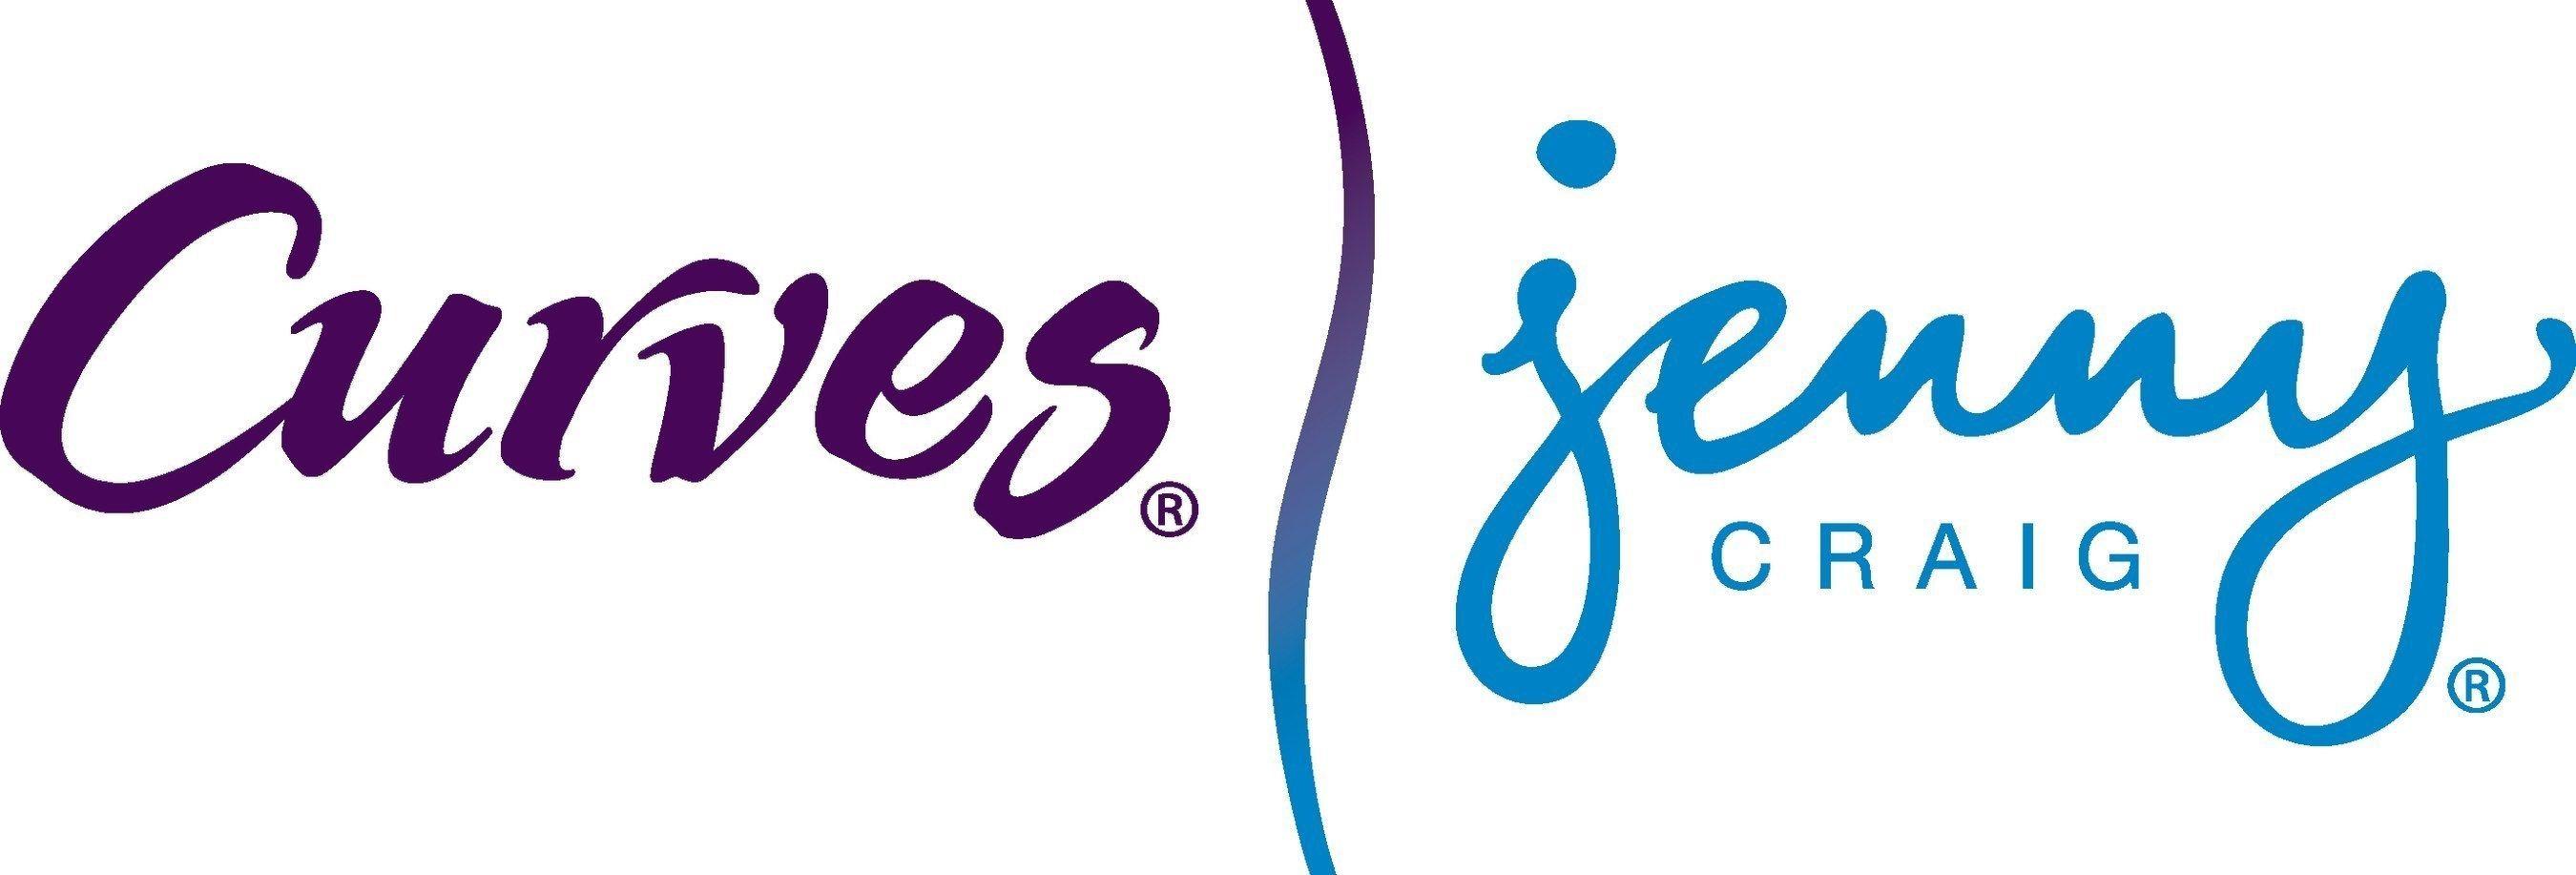 Curves Logo - Curves and Jenny Craig Come Together to Create a Complete Fitness ...